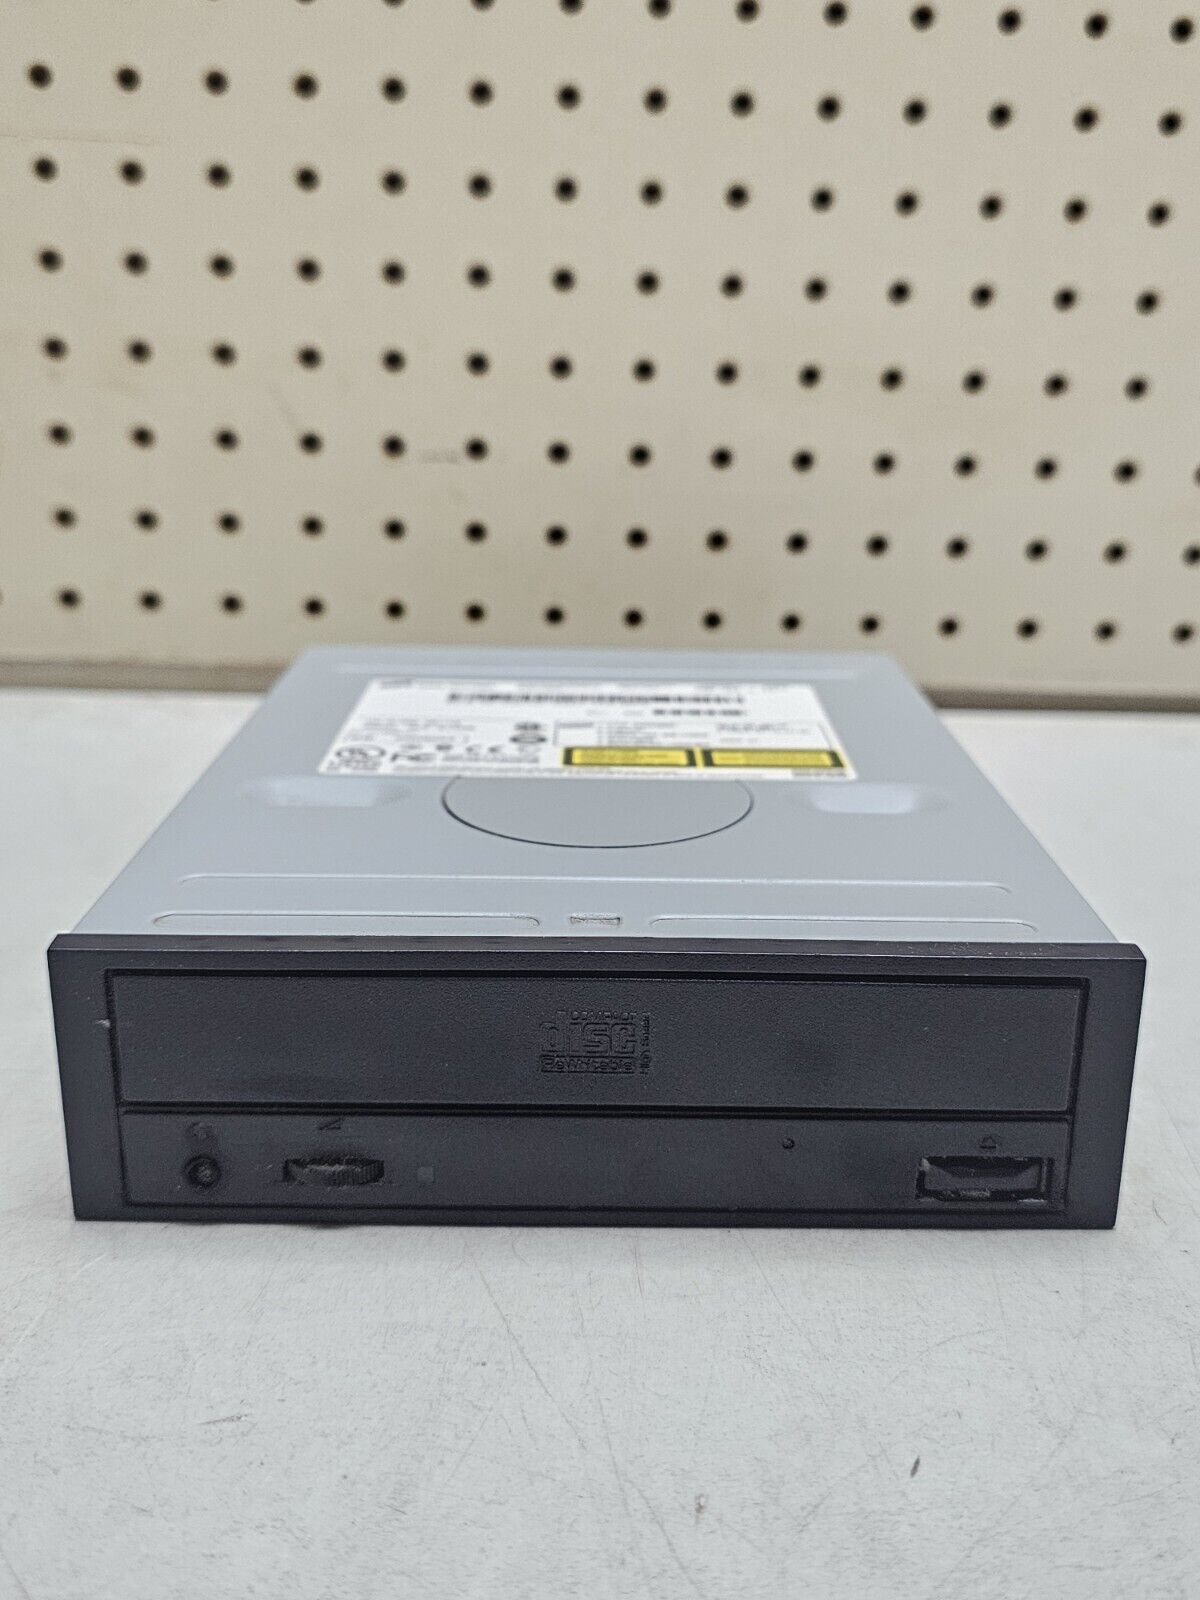 HL Data Storage CD-R/RW Drive Model: GCE-8160B No Power Cord Tested and Works